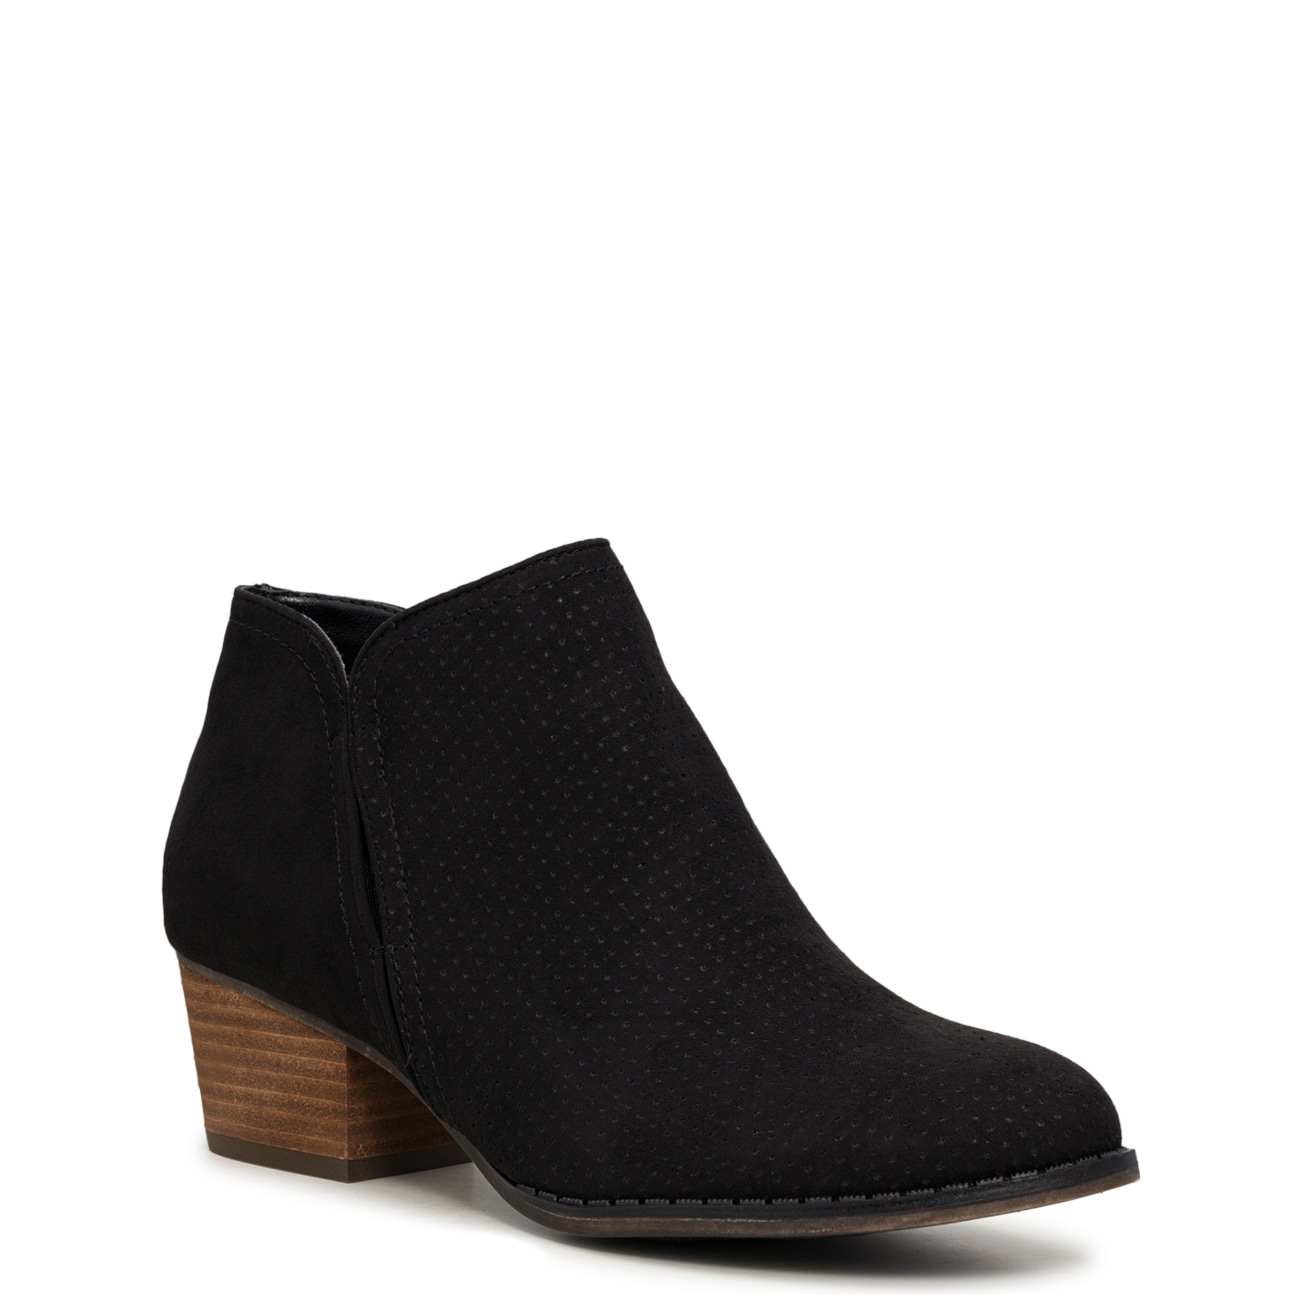 Blake Ankle Wide Boot